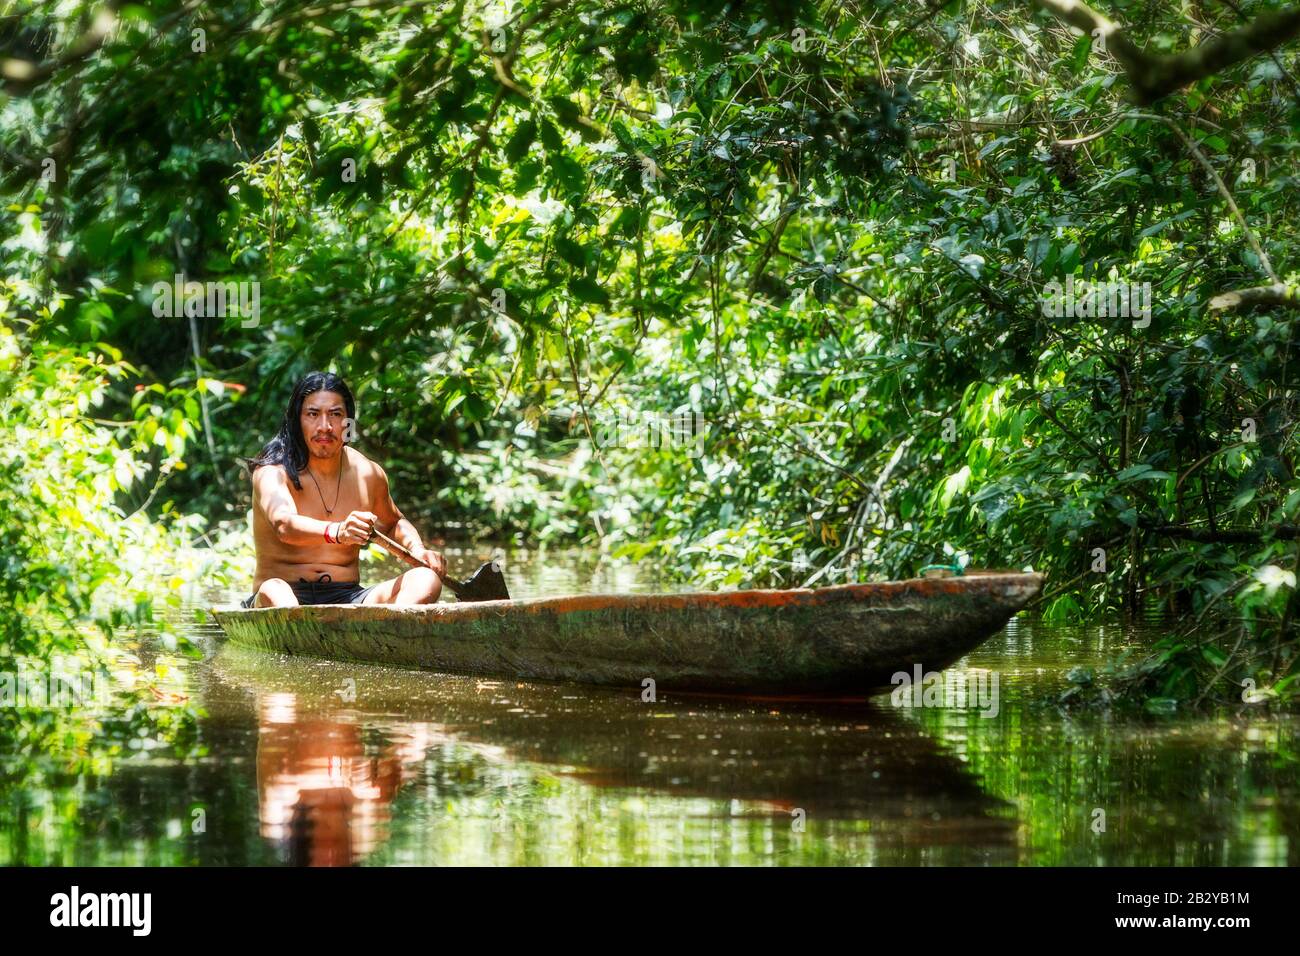 Indigenous Mature Man On Typical Wooden Boat Jagged From A Single Tree Navigating Misty Waters Of Ecuadorian Amazonian Primary Jungle Stock Photo